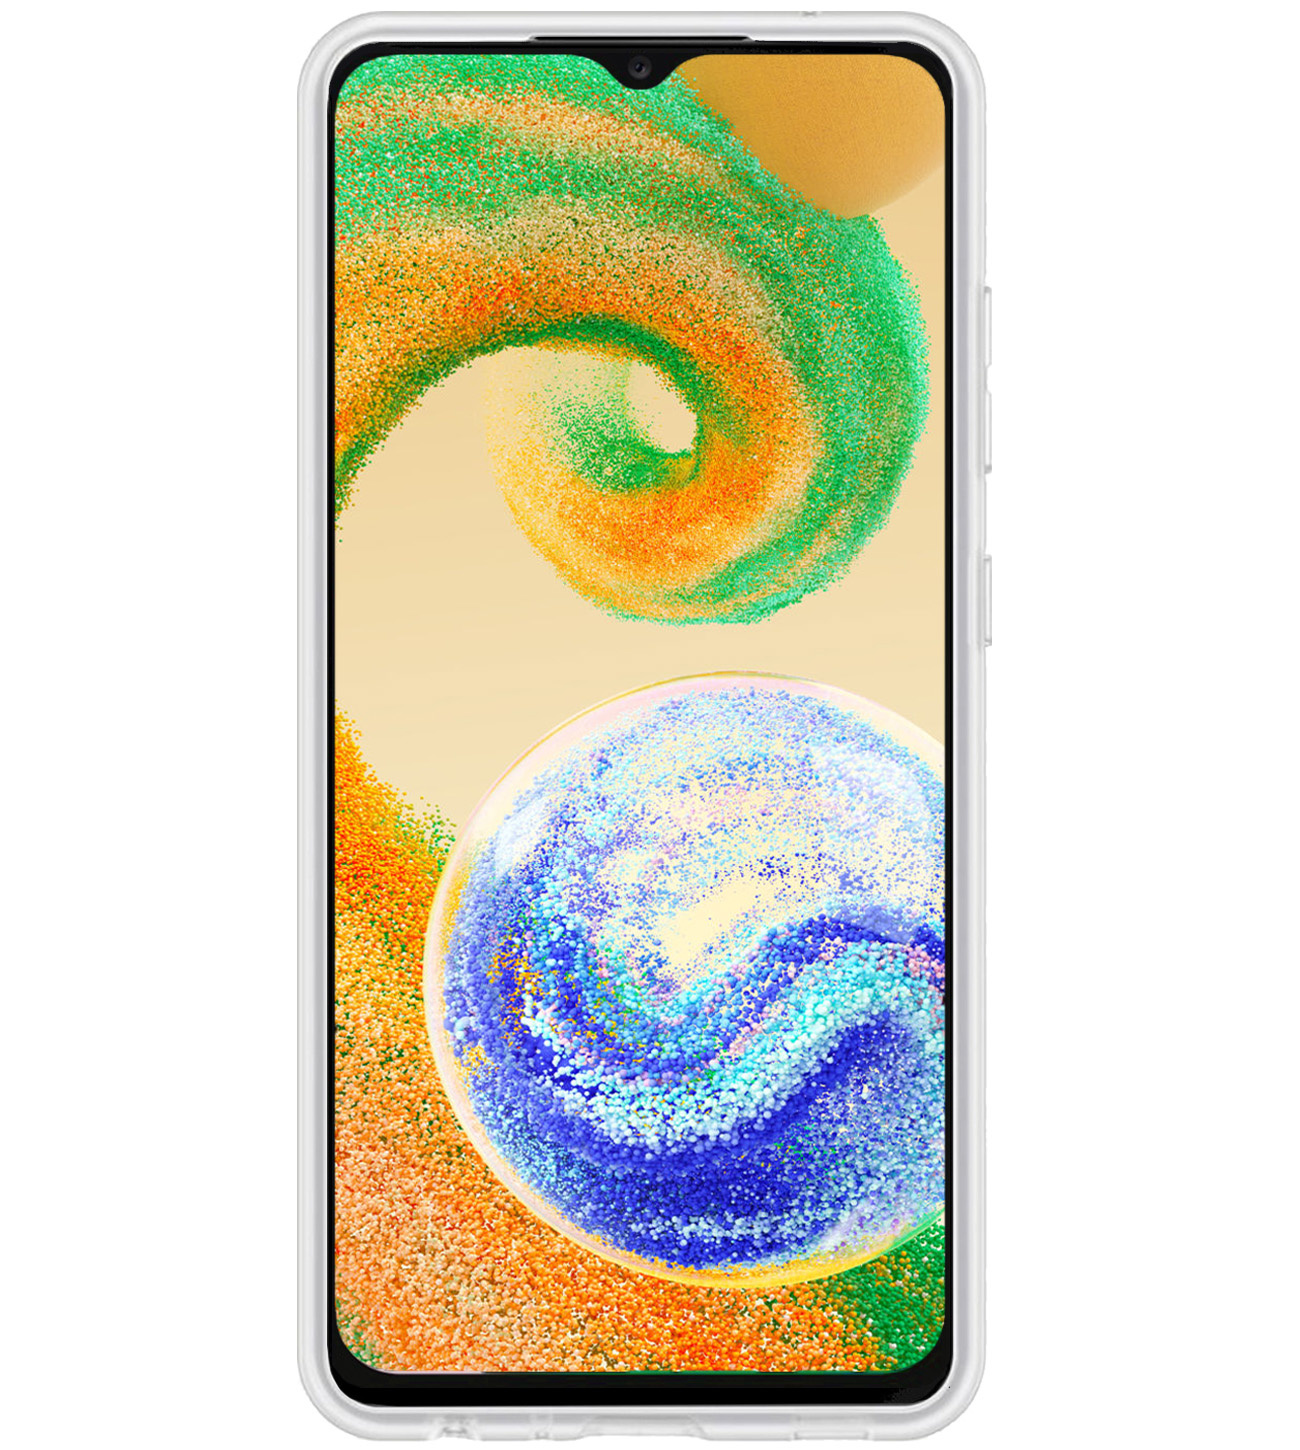 BASEY. Hoes Geschikt voor Samsung A04s Hoesje Siliconen Back Cover Case - Hoesje Geschikt voor Samsung Galaxy A04s Hoes Cover Hoesje - Transparant